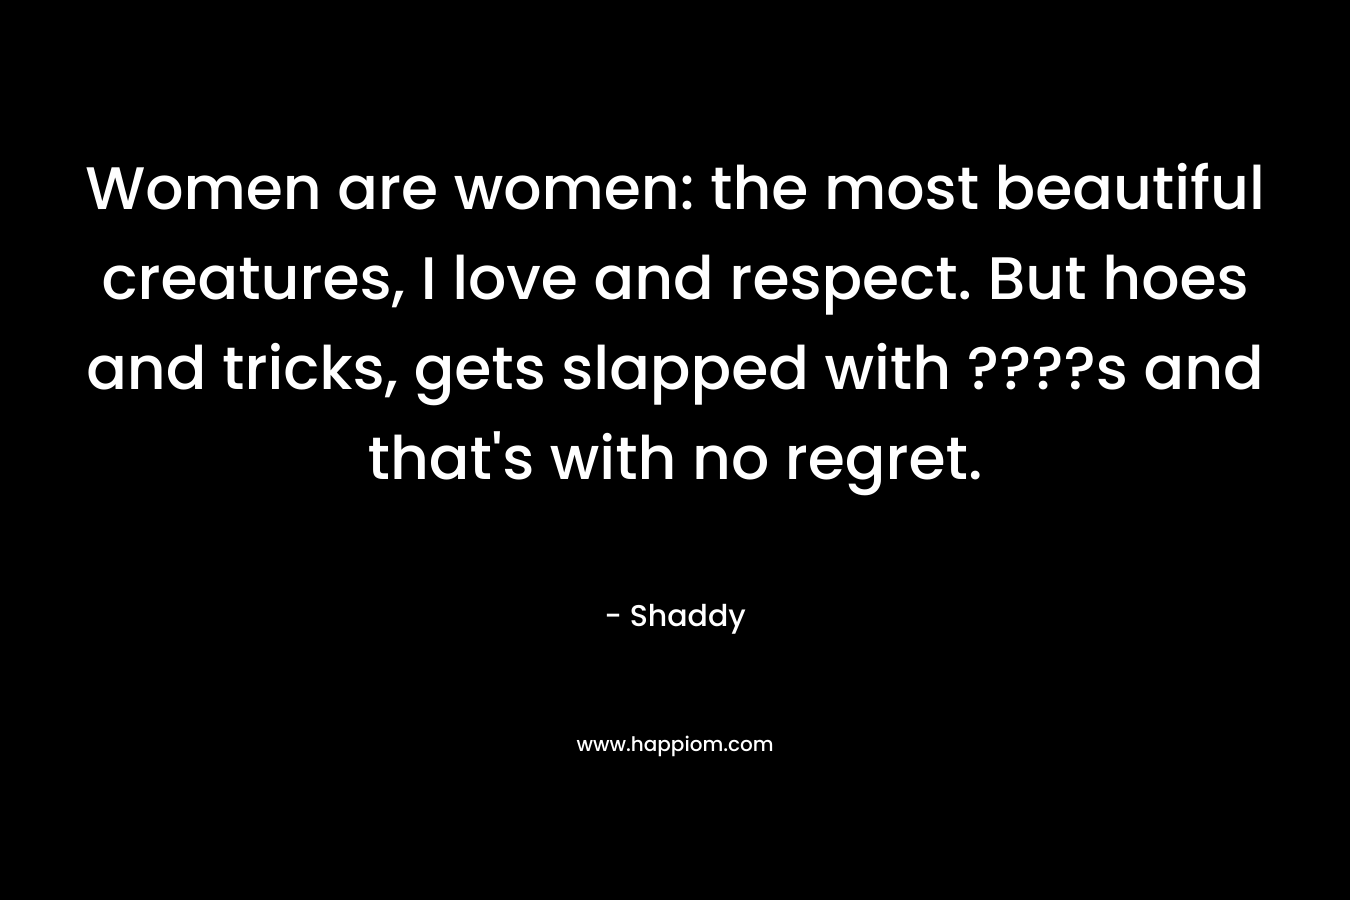 Women are women: the most beautiful creatures, I love and respect. But hoes and tricks, gets slapped with ????s and that’s with no regret. – Shaddy